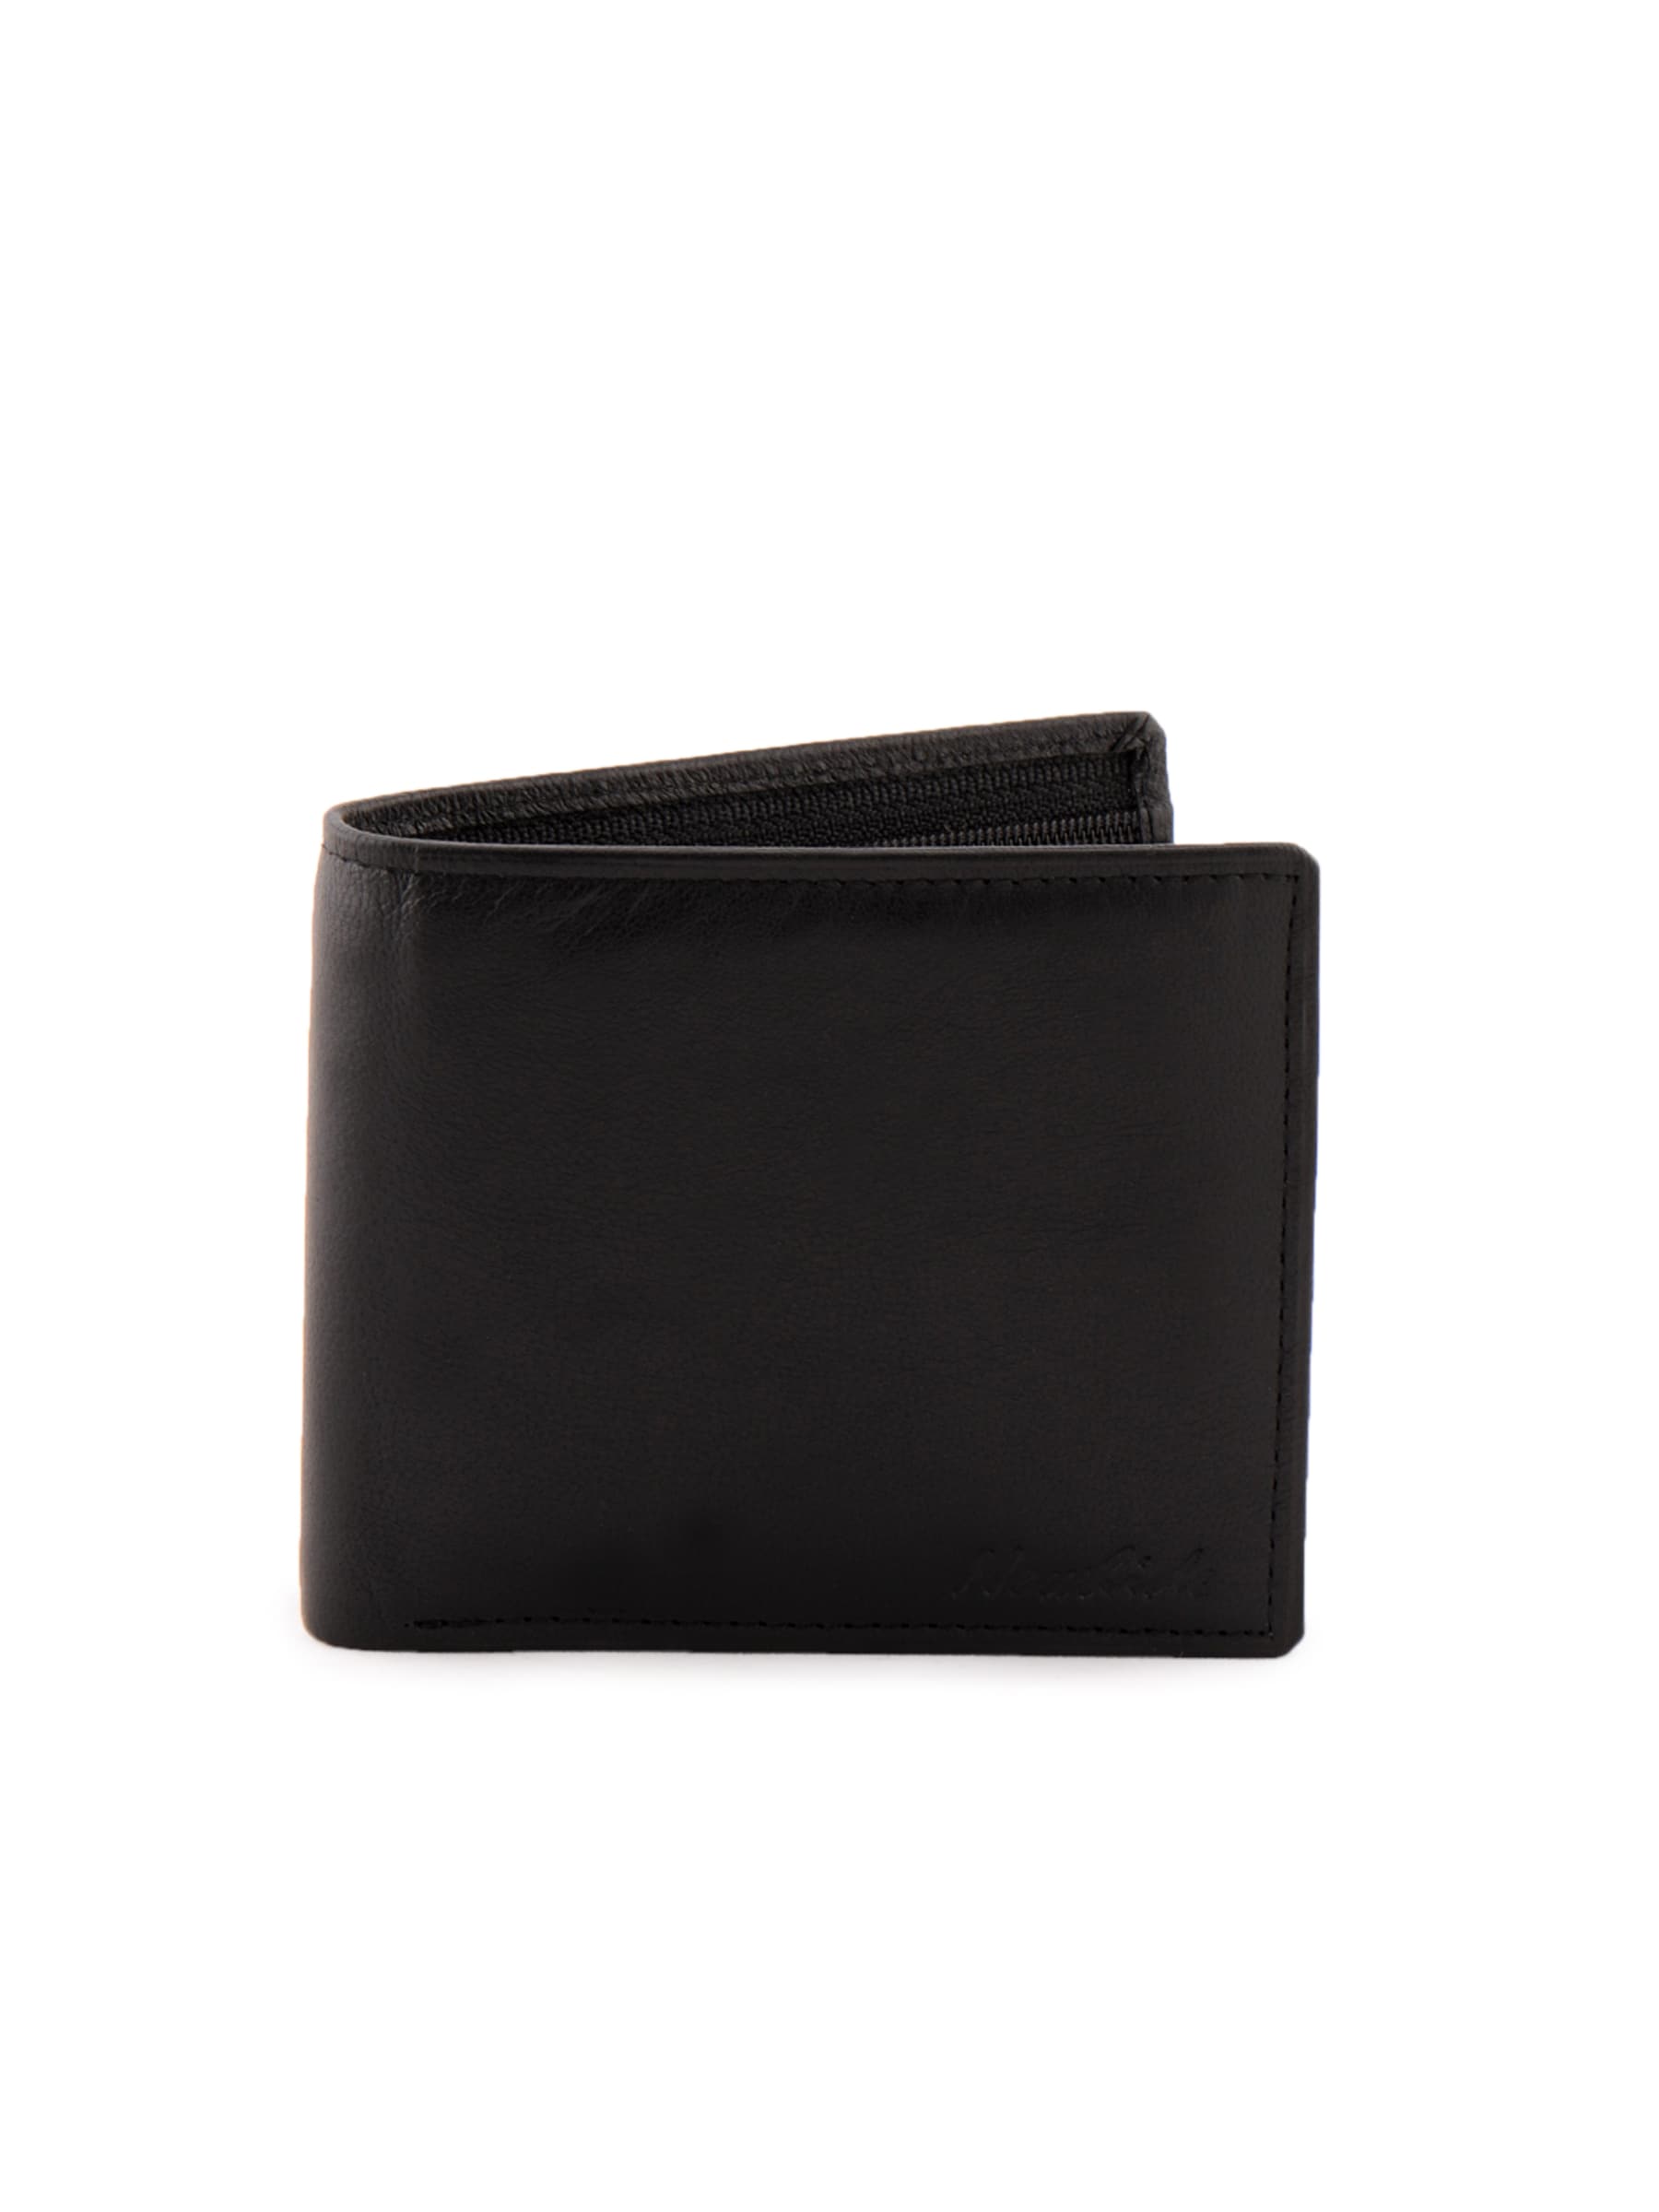 Newhide Authentic Wallet